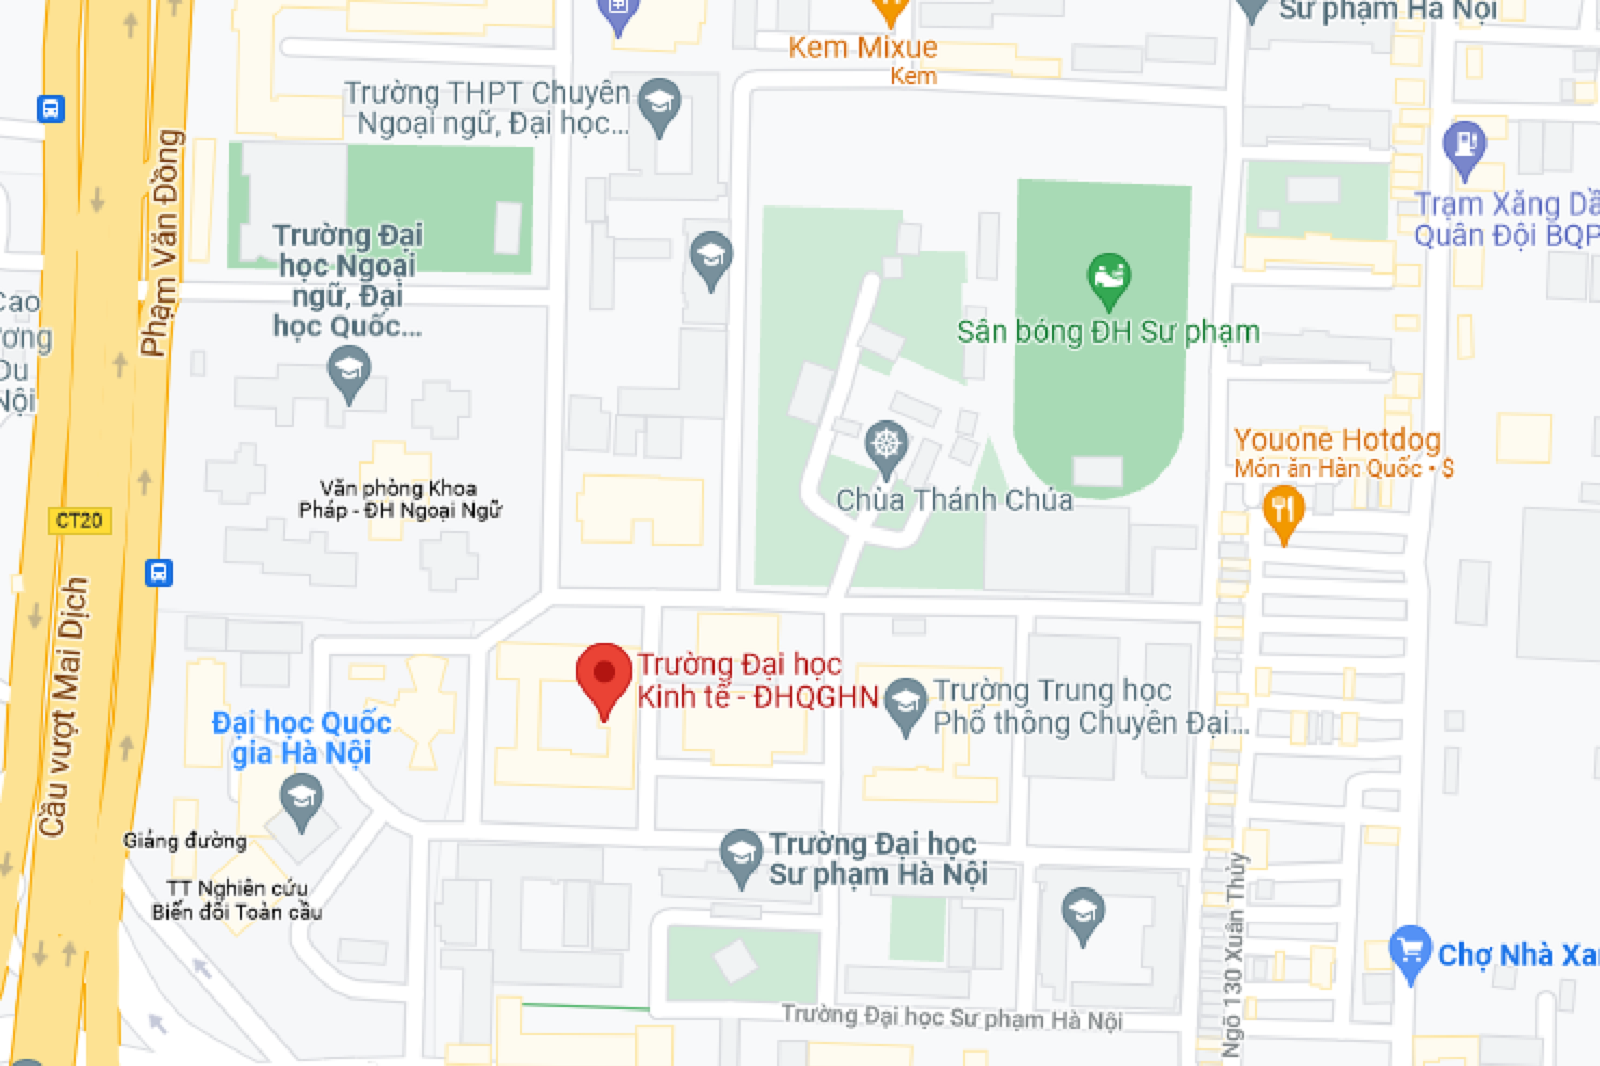 Map and directions to the Lecture Halls of UEB